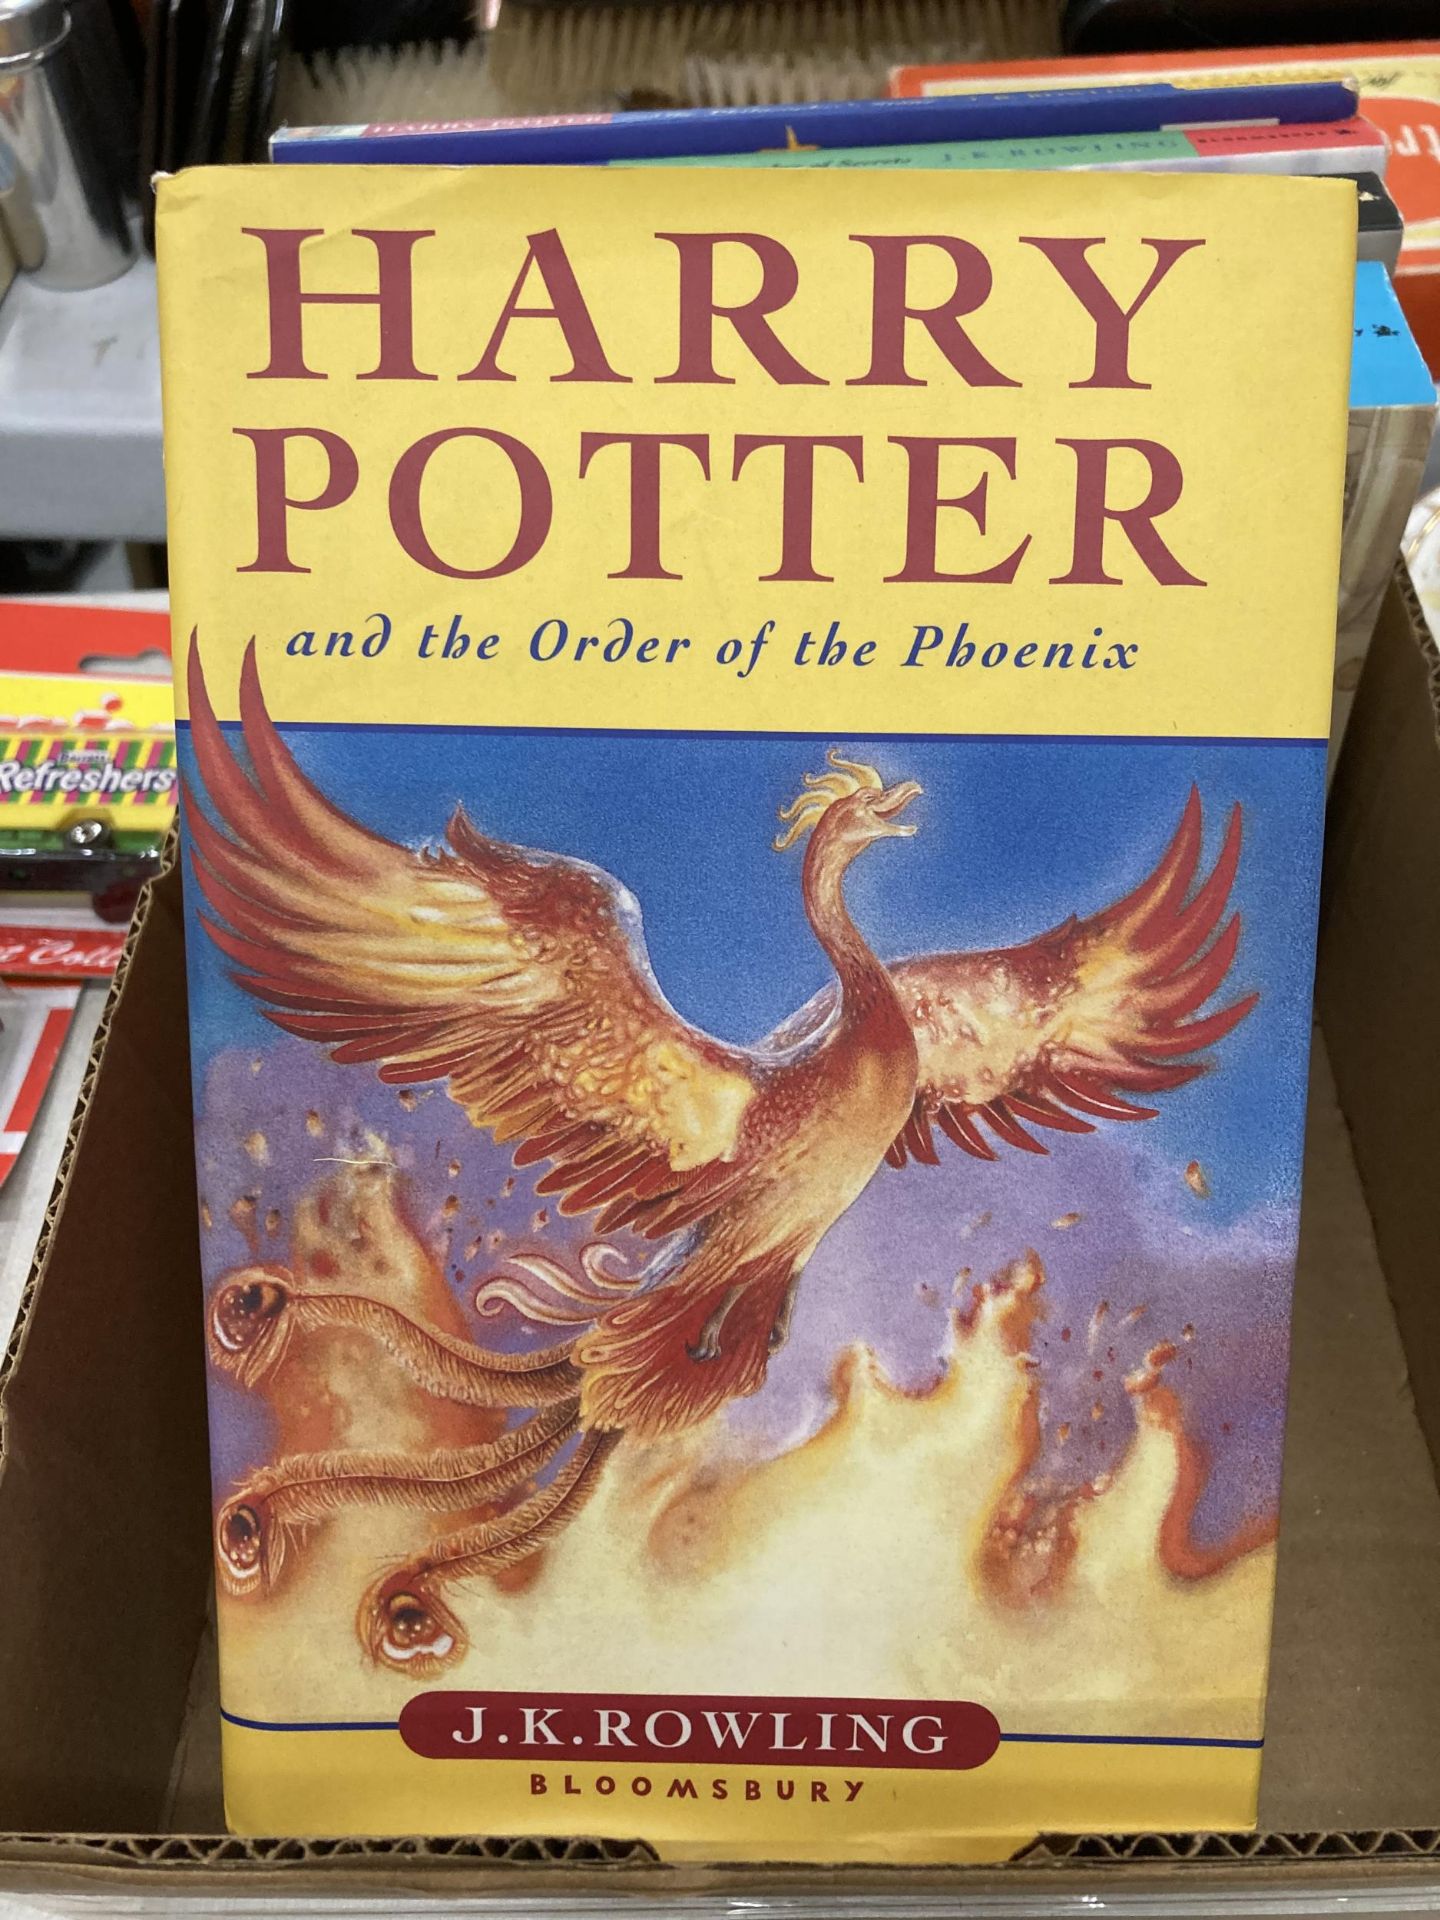 THE HARRY POTTER 1-7 BOOK SET - Image 4 of 4